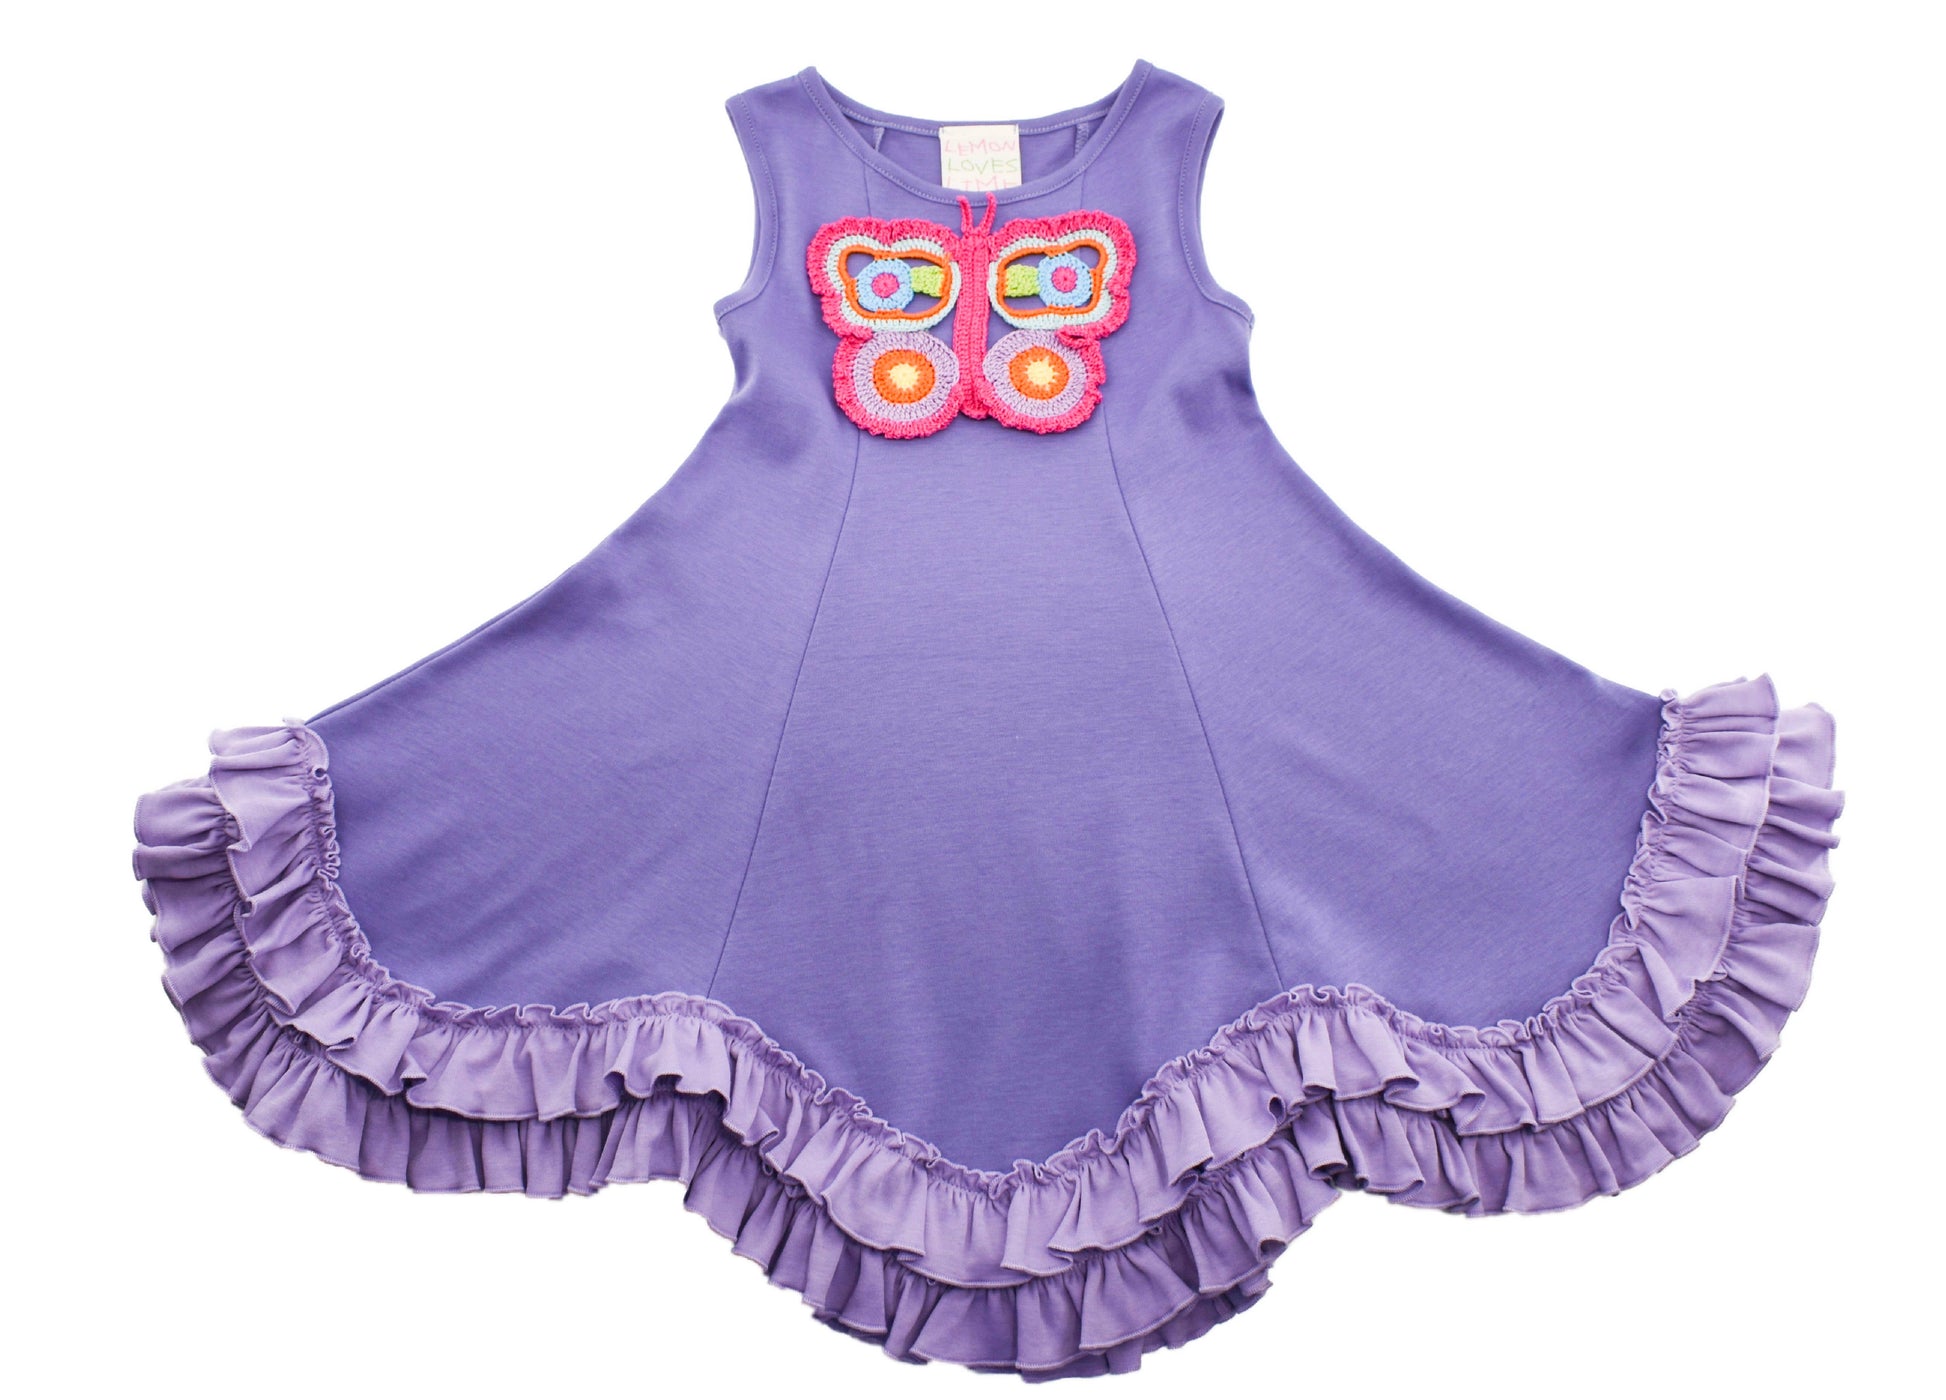 Heavenly Butterfly Dress in Veronica  - Doodlebug's Children's Boutique